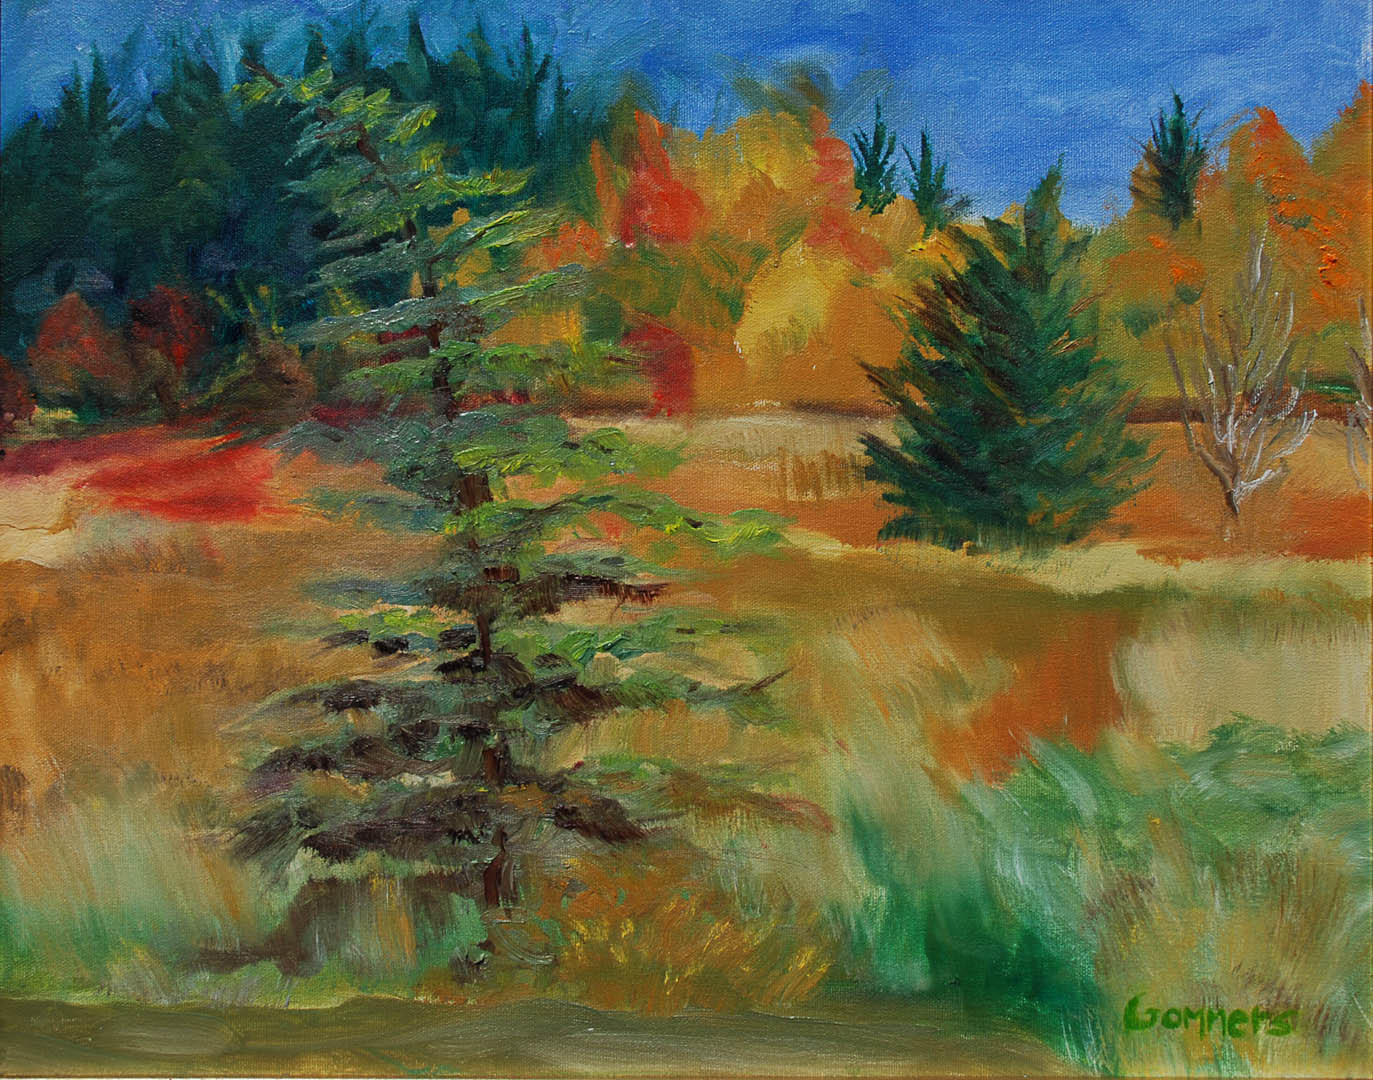 04 Birchpoint in Fall I, Oil on canvas, 16 x 20 $1600